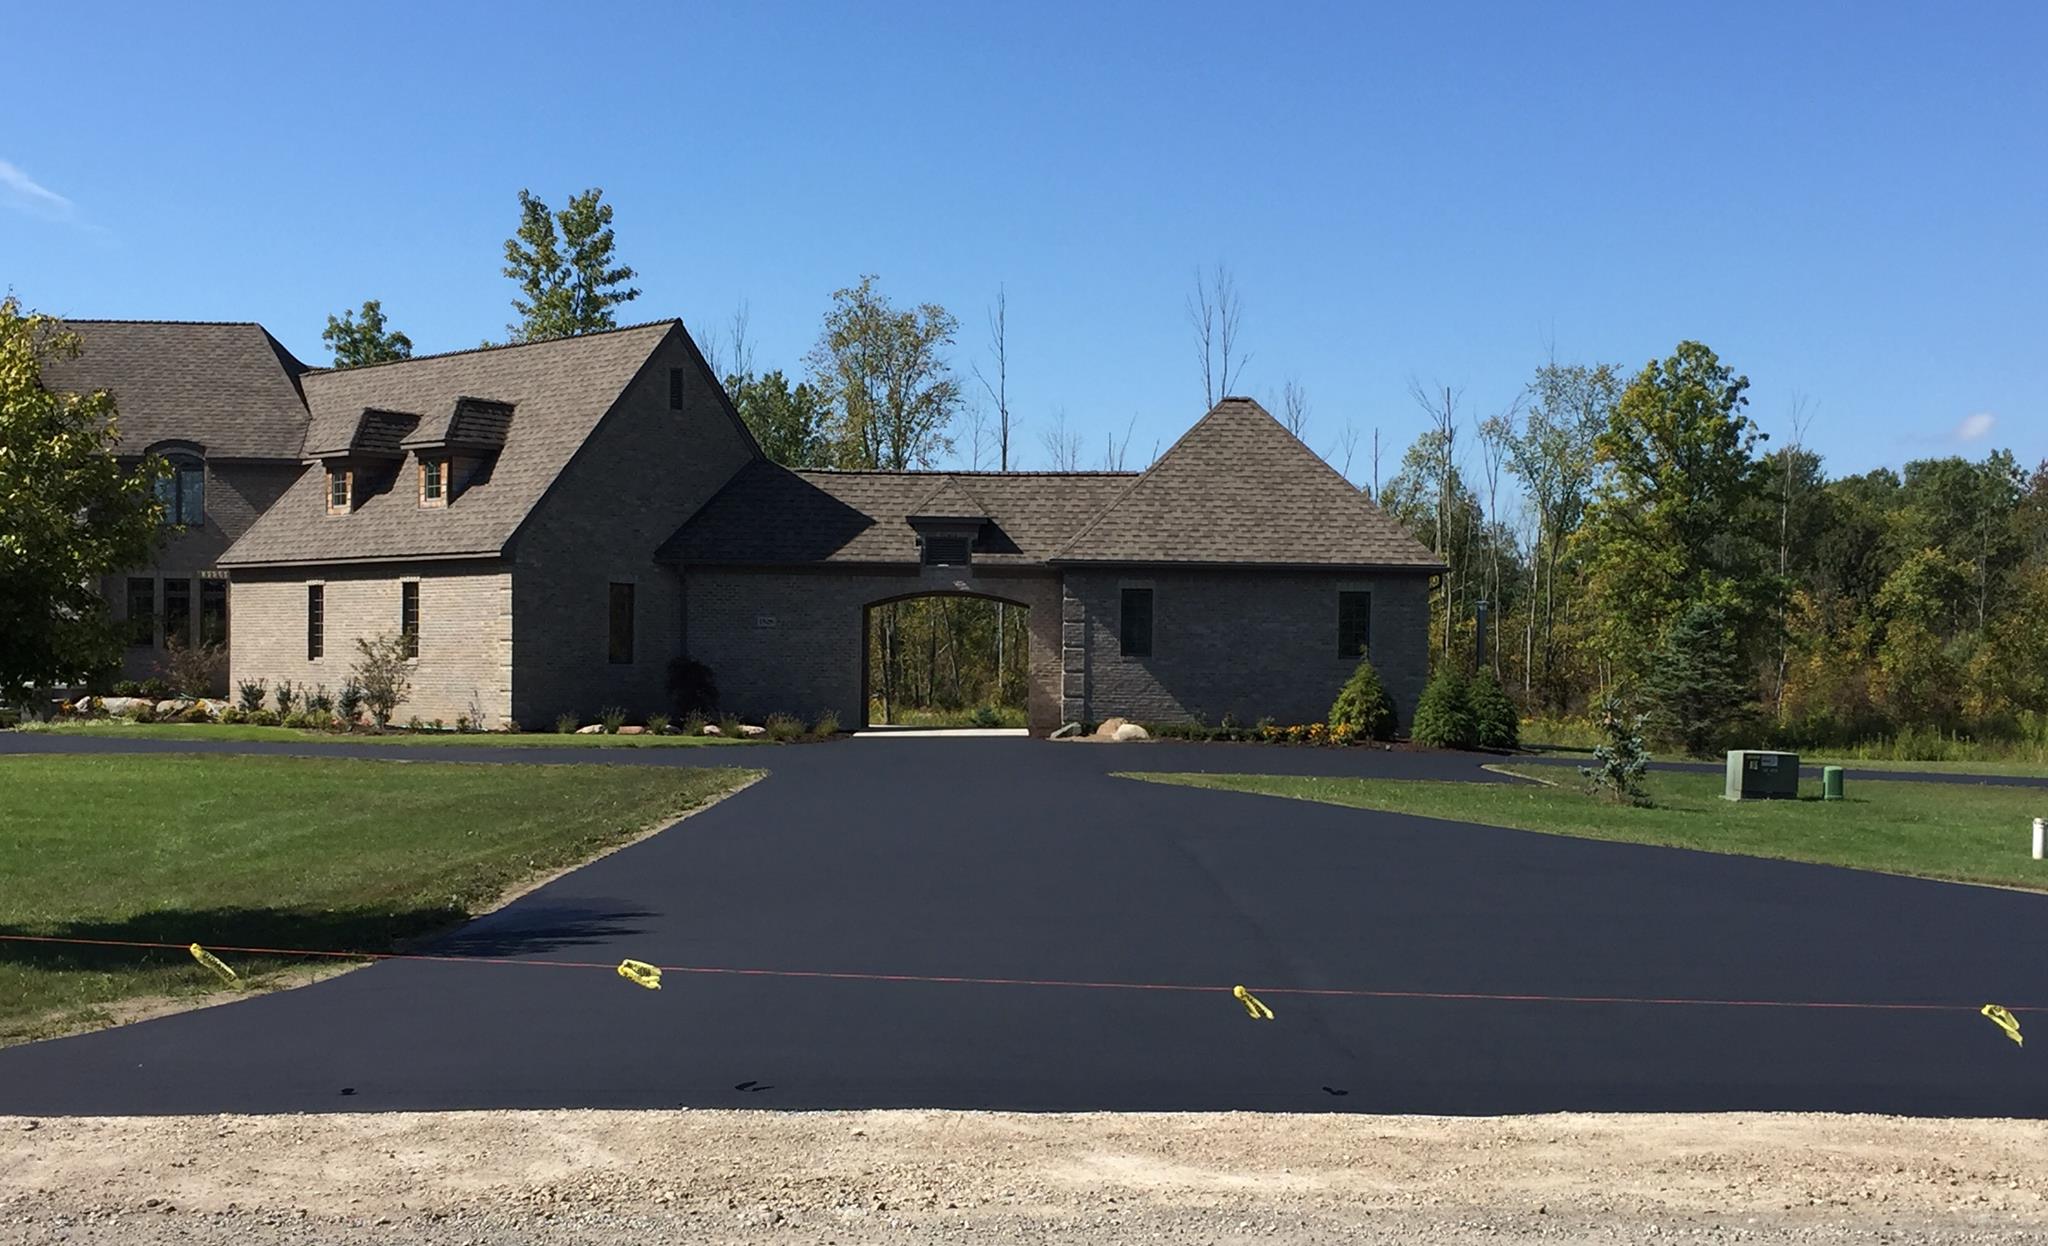 Residential driveway paving project by Total Asphalt Paving Inc.